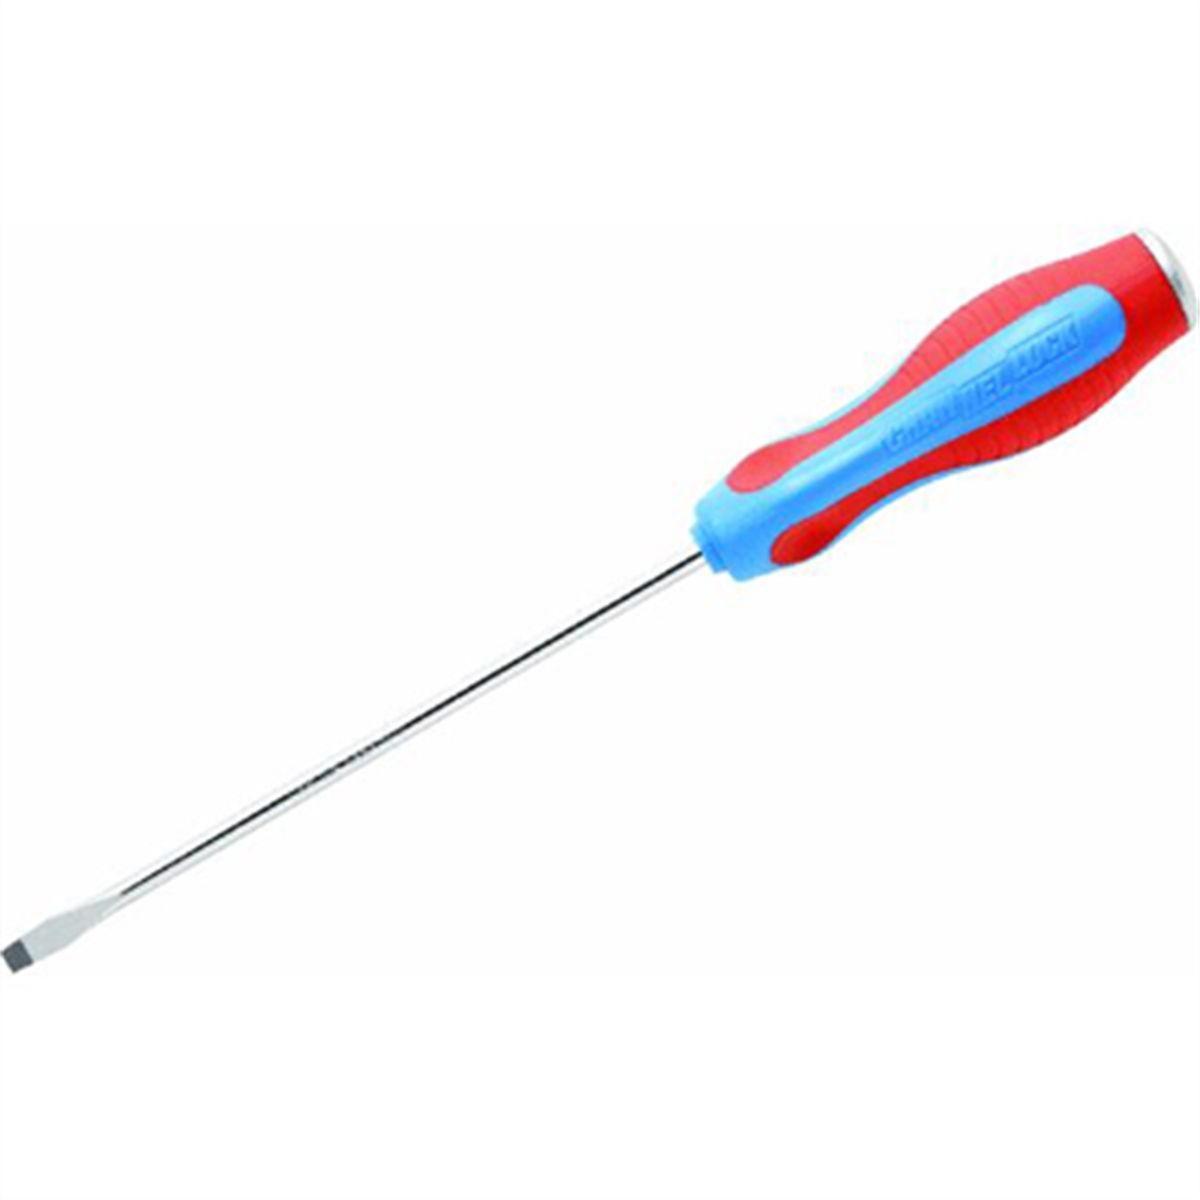 1/4" X 4" Slotted Screwdriver